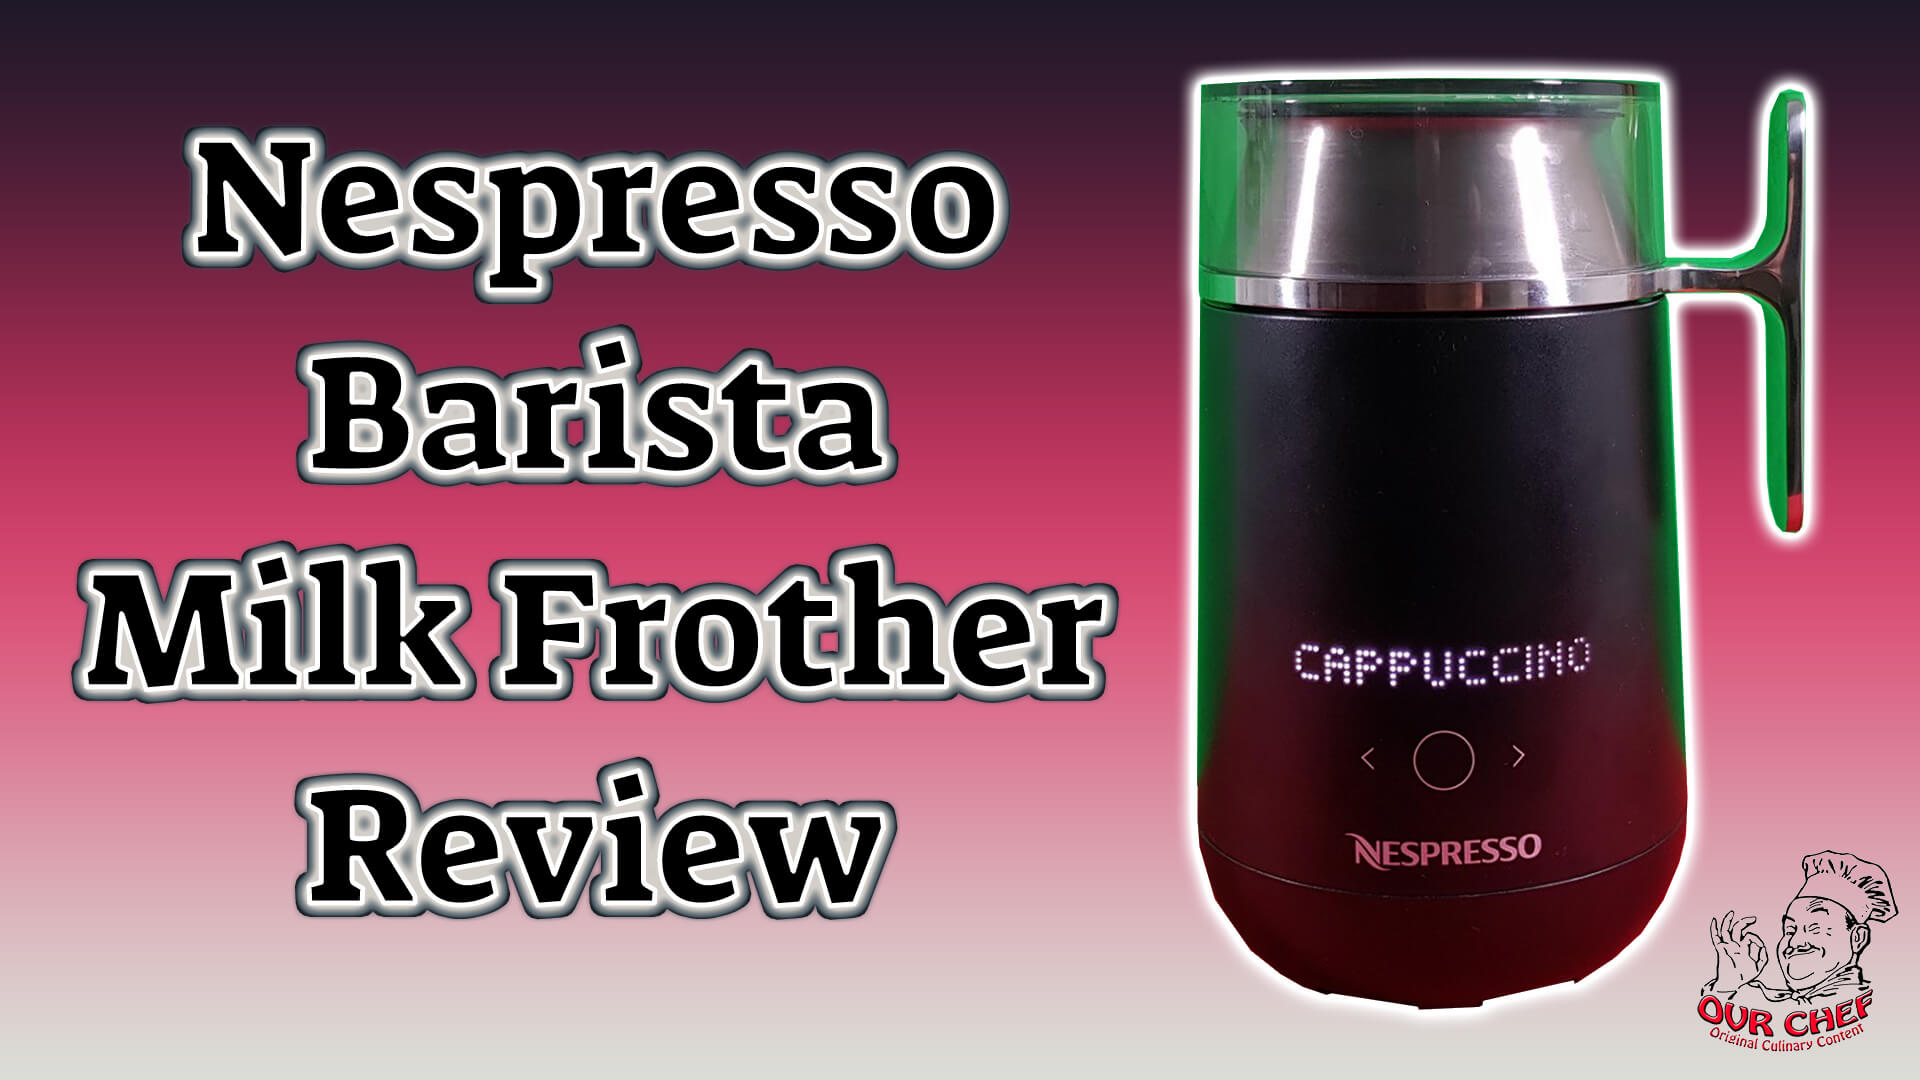 Nespresso Barista Milk Frother Review (Thumbnail)